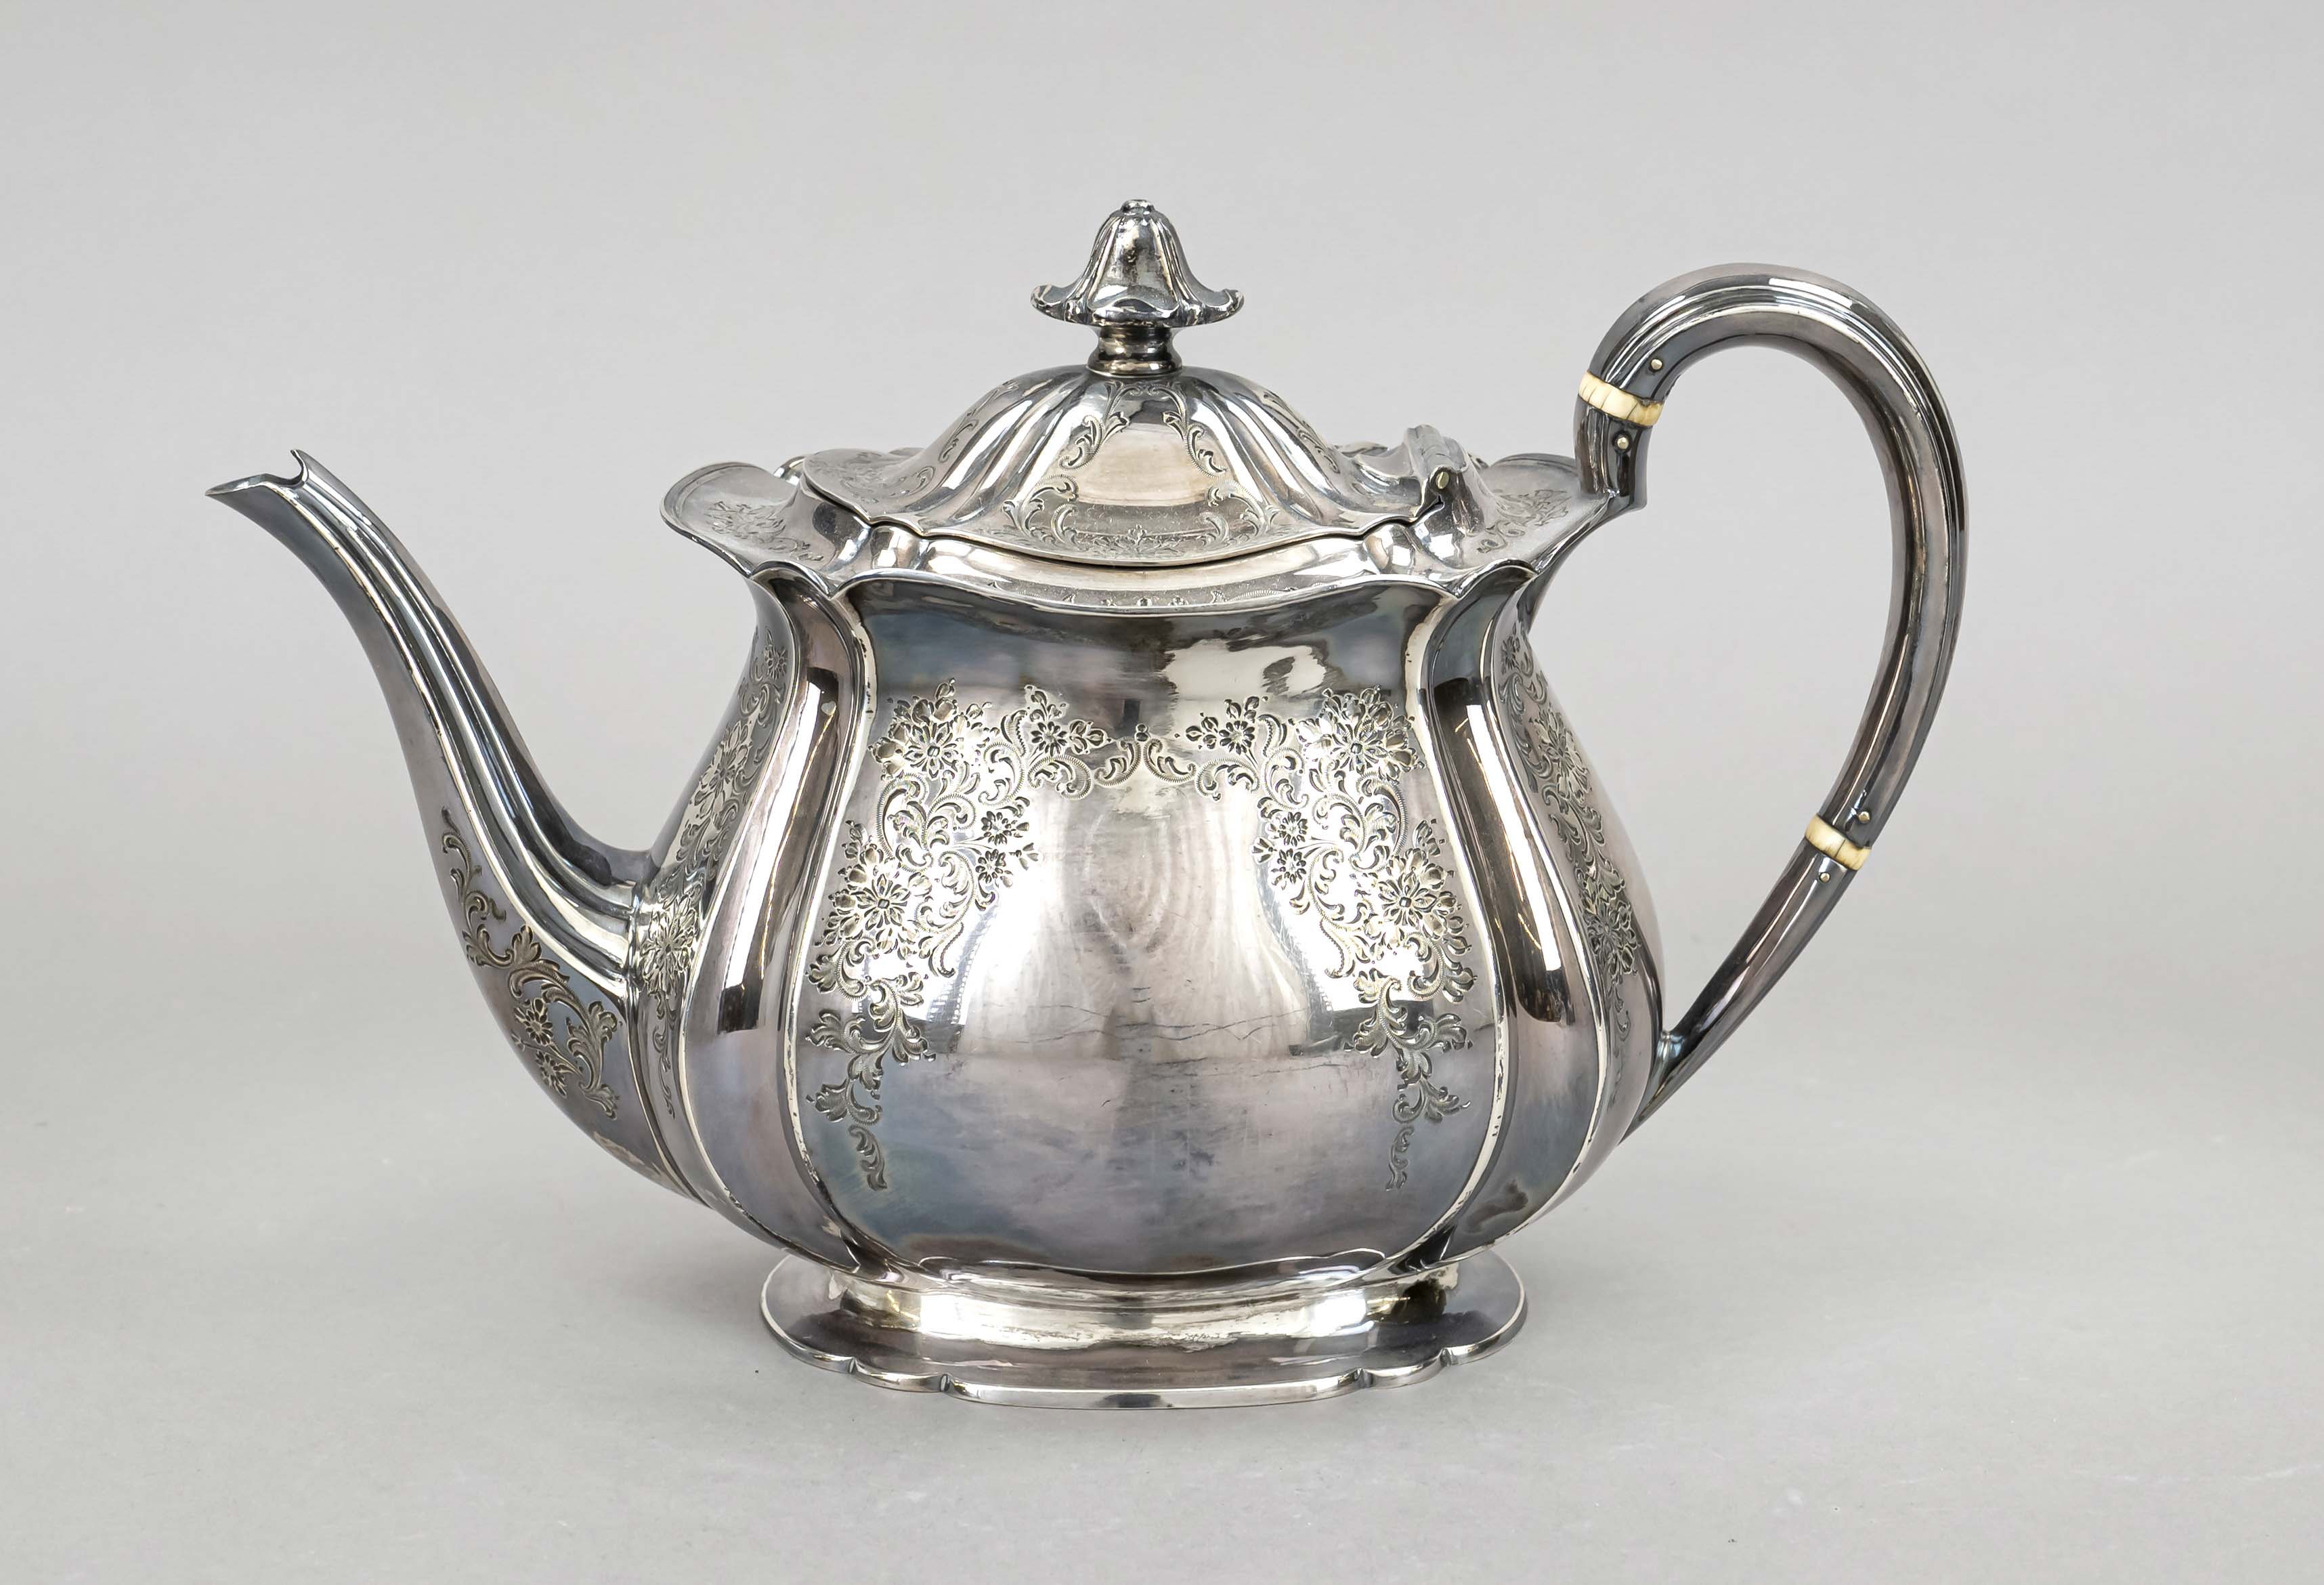 Teapot, England, 1900, Sheffield town mark, MZ crossed, Atkin Brothers (?), sterling silver 925/000,